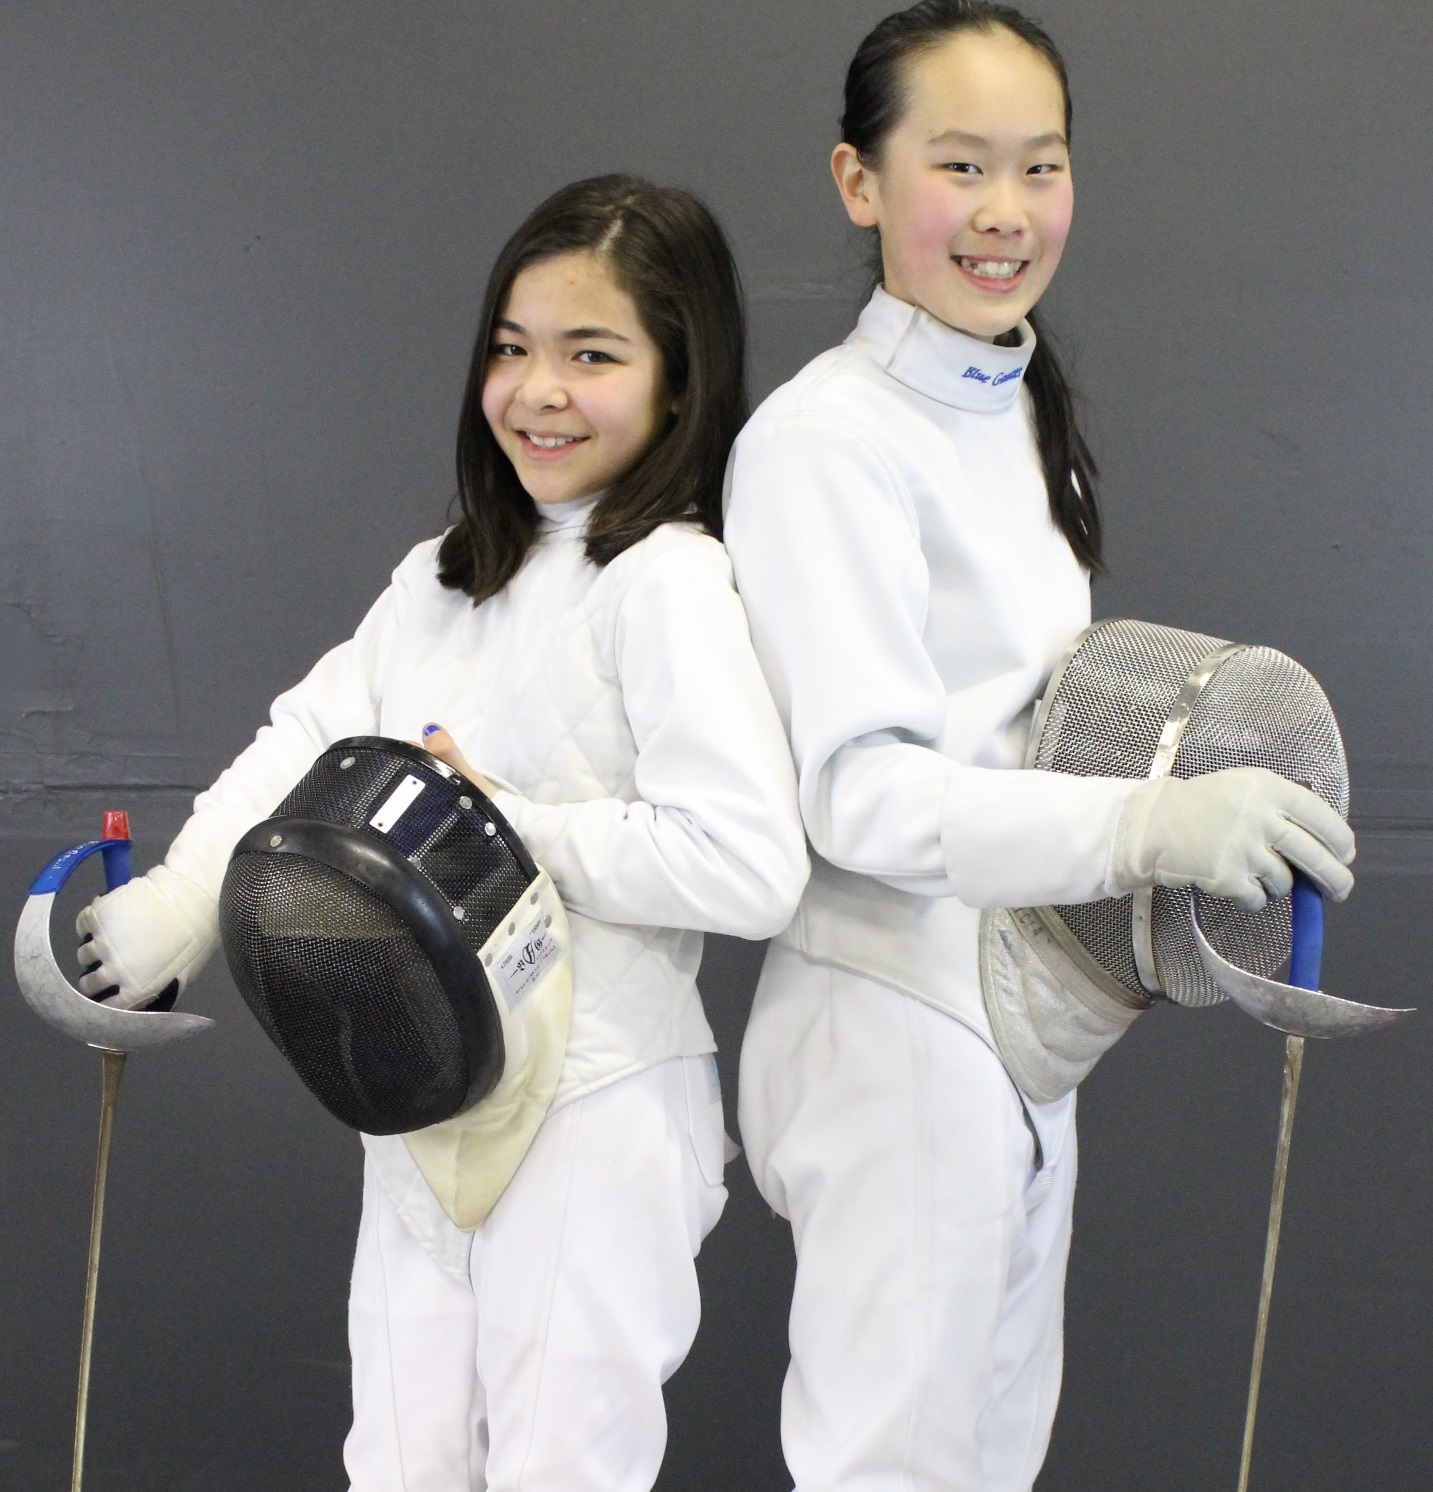 Fencing Equipment And Weapons